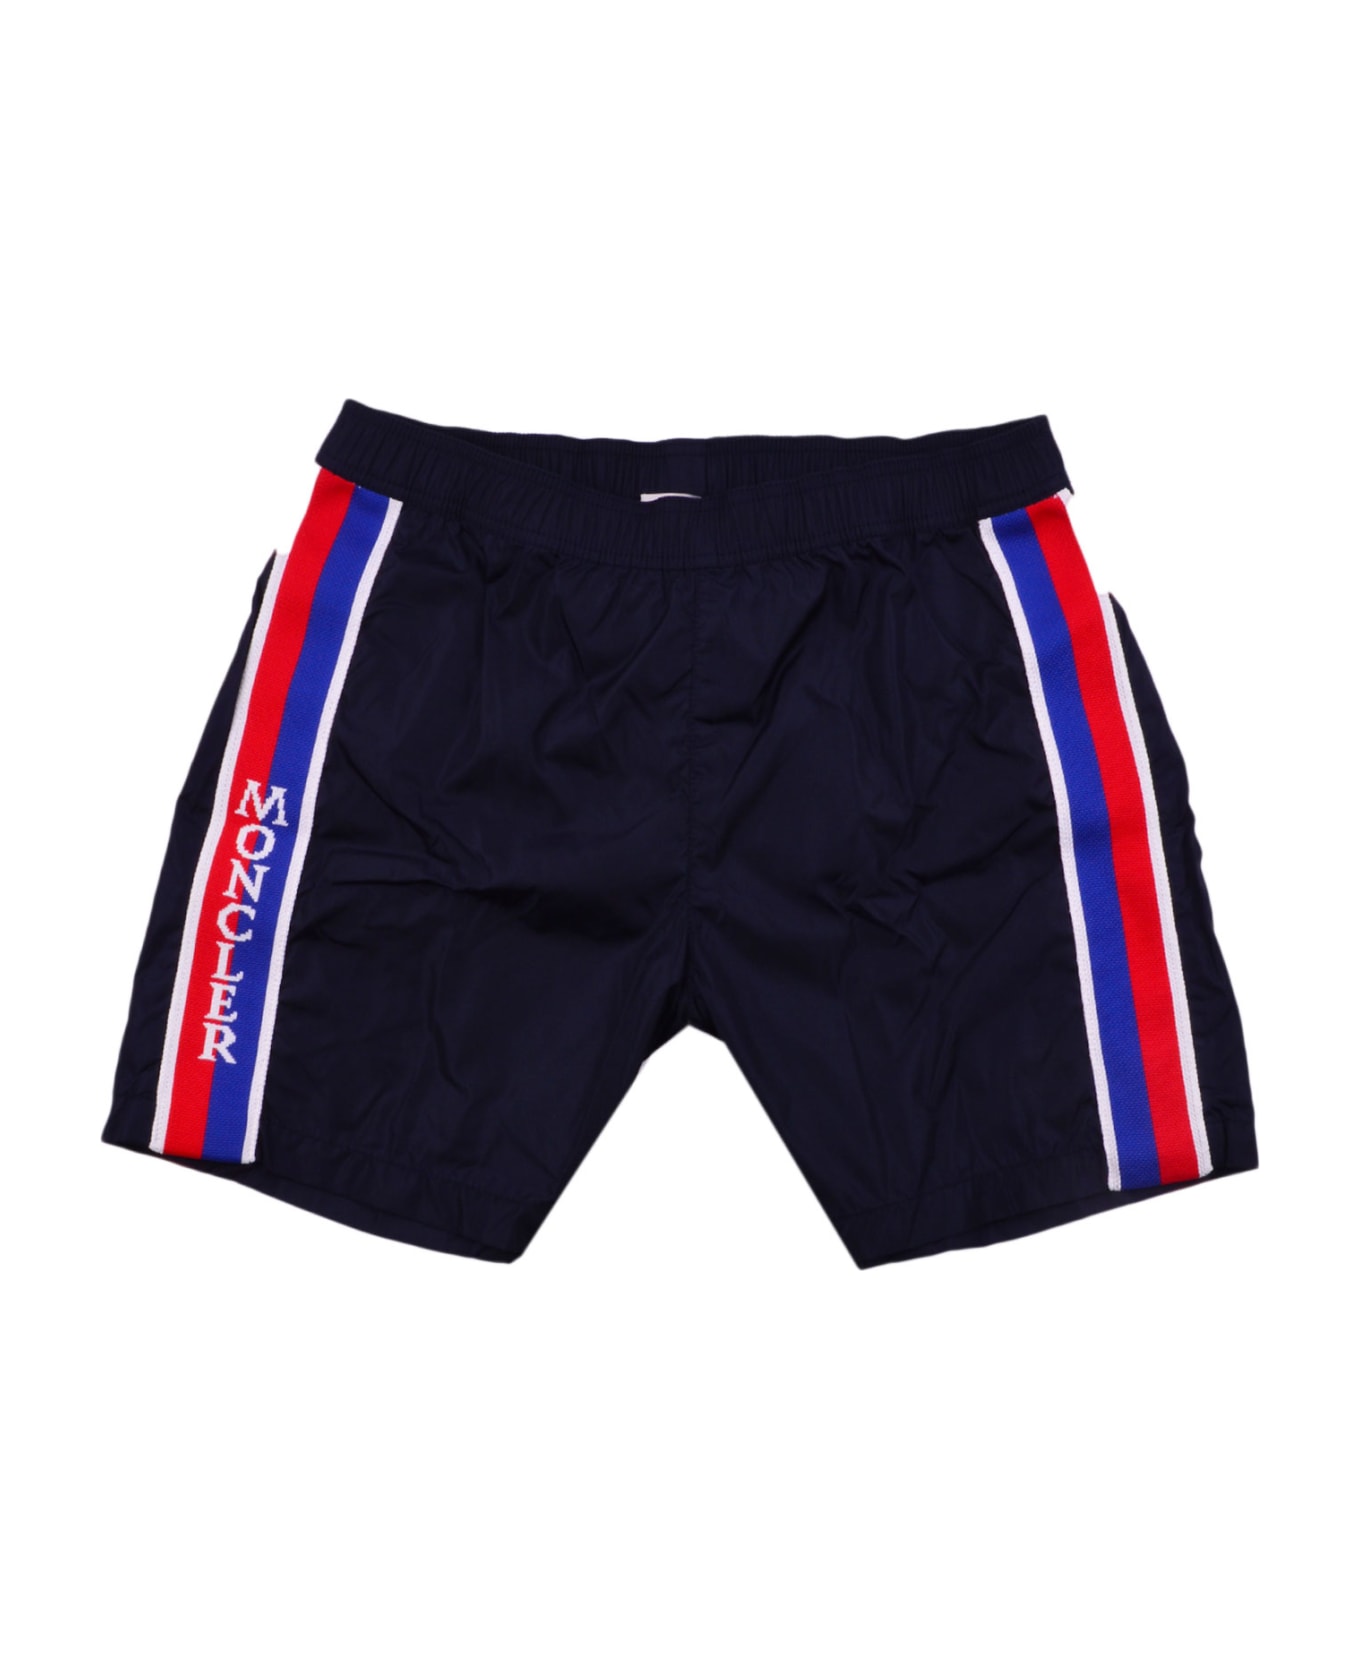 Moncler Shorts Swimsuit With Side Bands - Blue